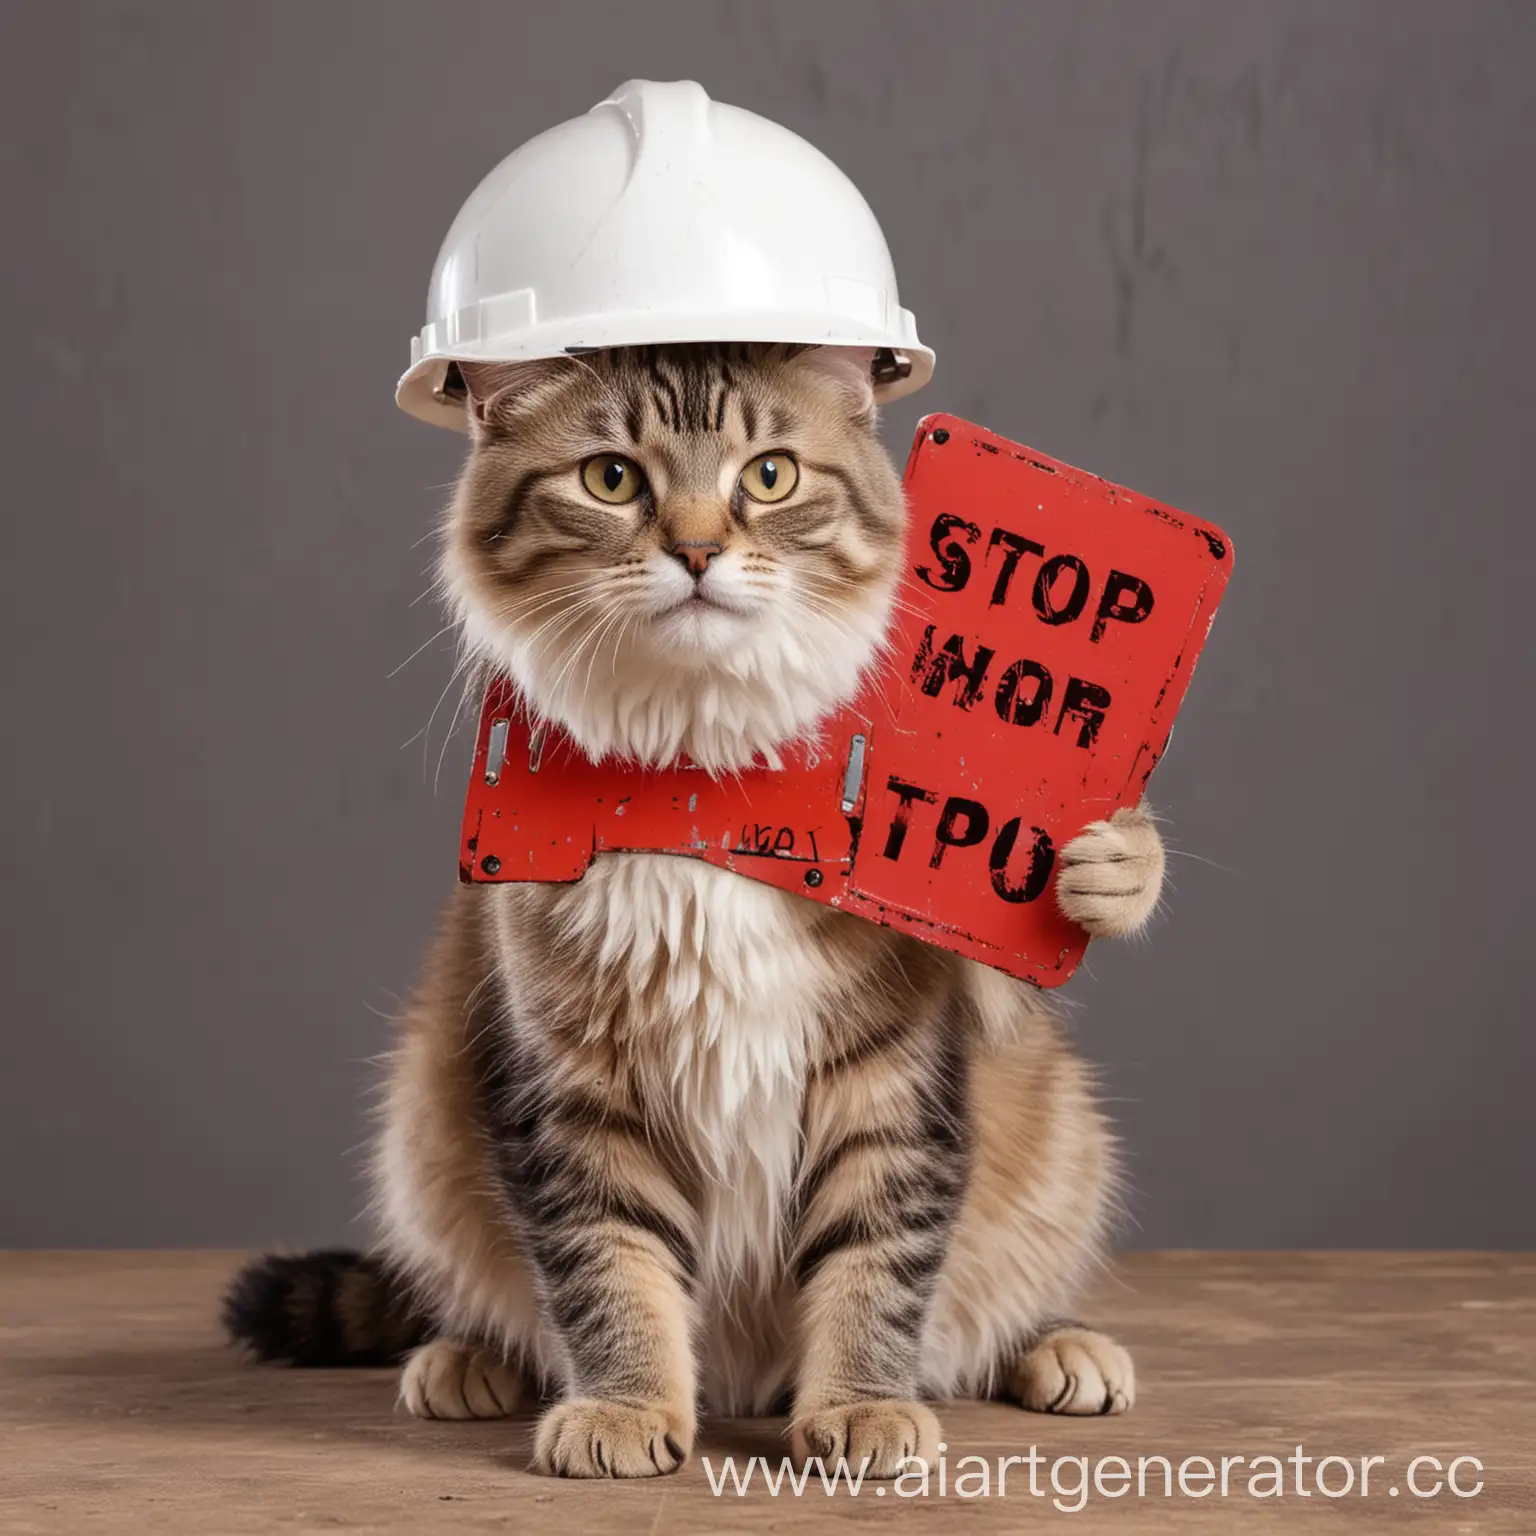 Construction-Cat-Holding-Red-STOP-Sign